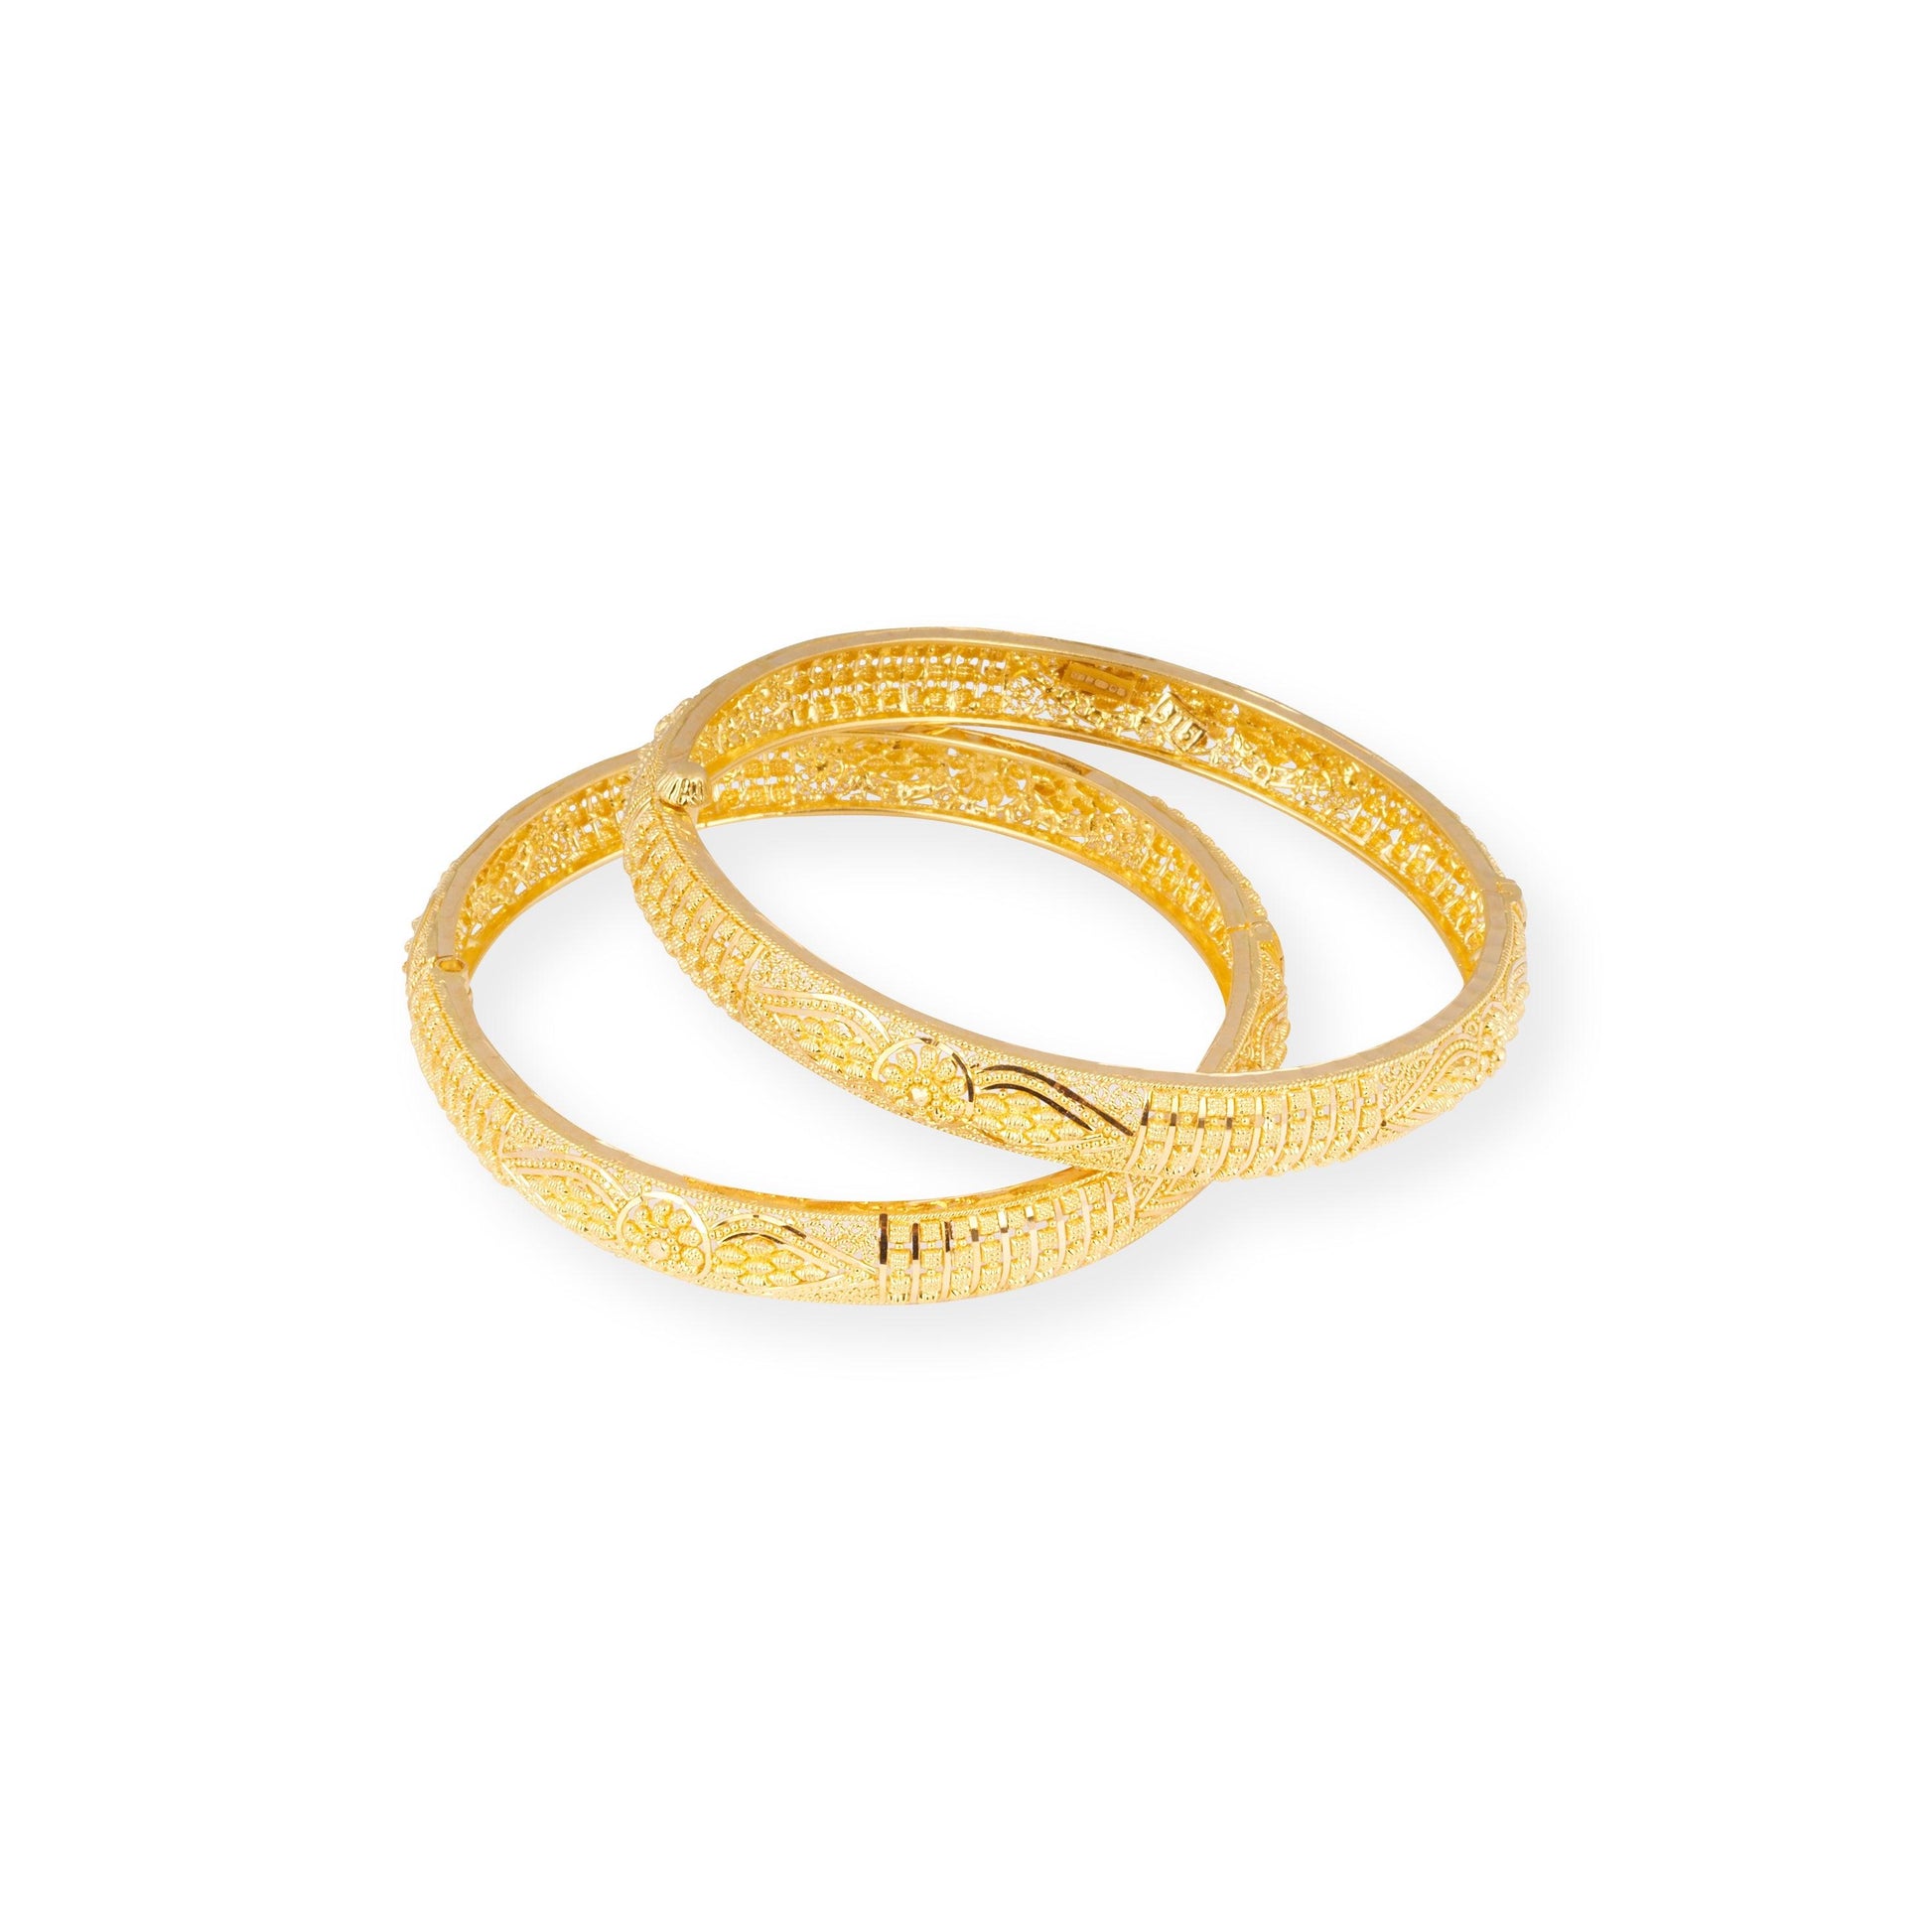 Pair of 22ct Bangles With Hinge & Openable Screw Fitting B-8110 - Minar Jewellers